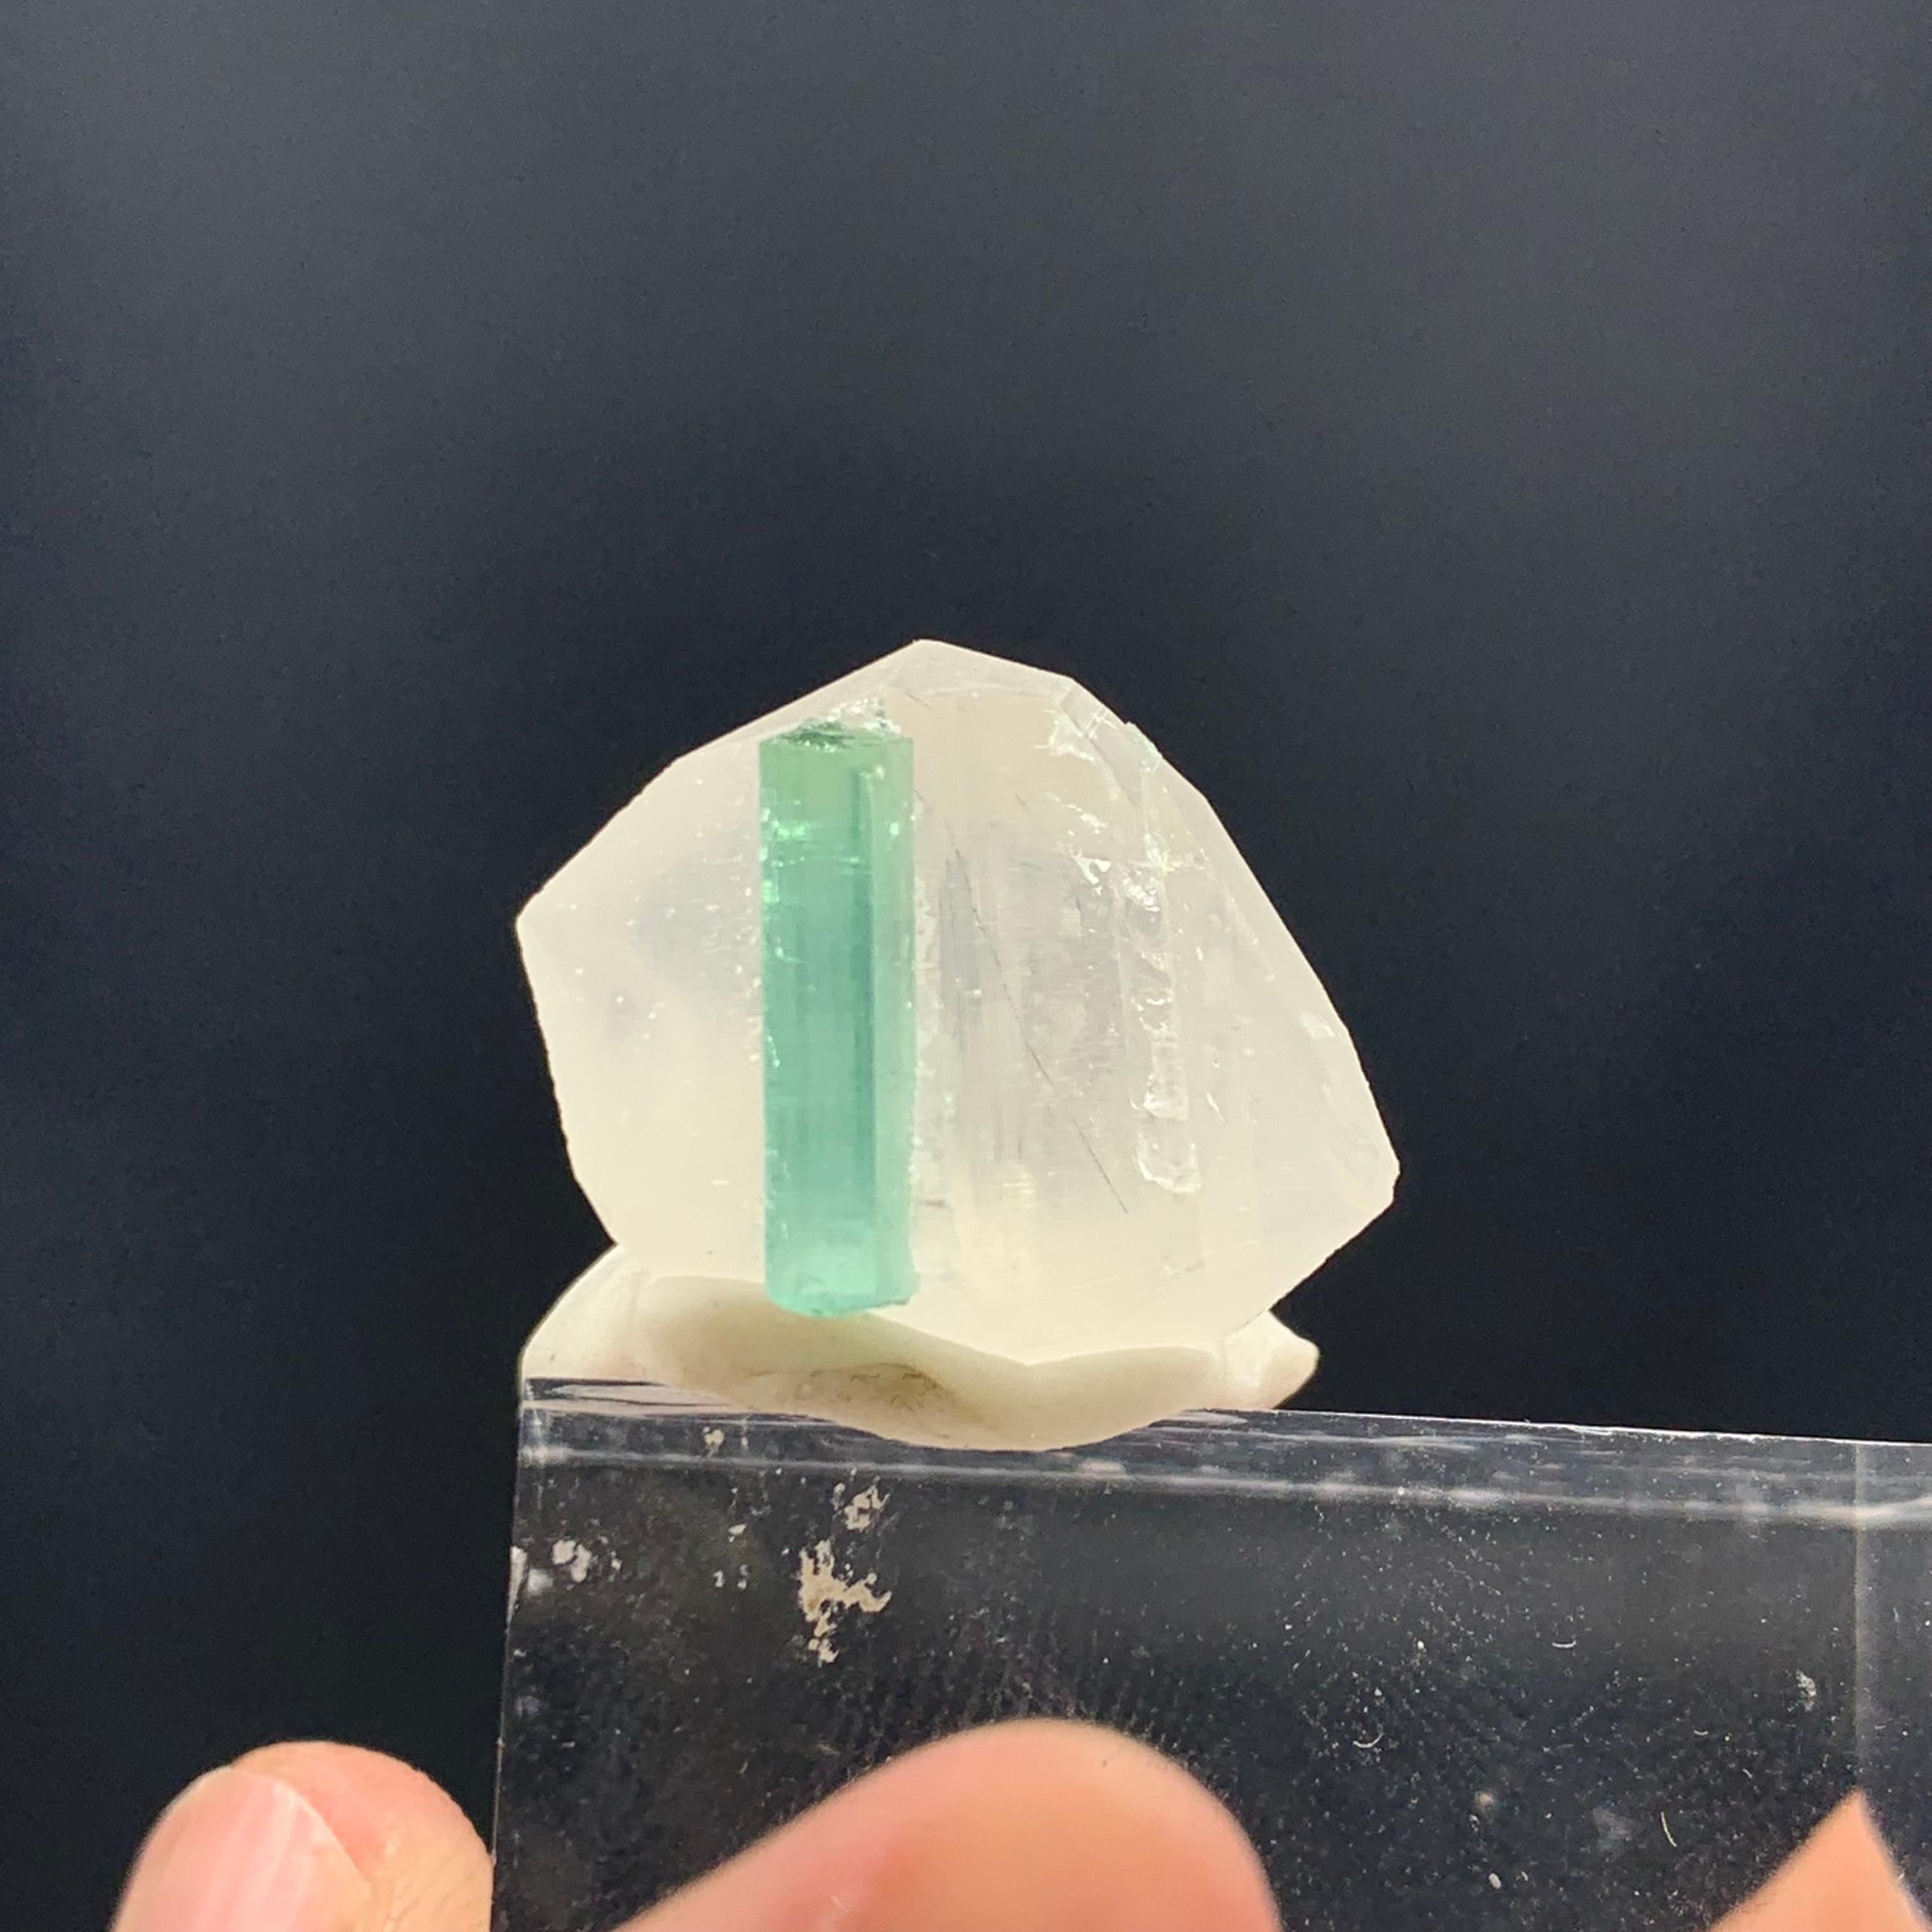 4.40 Gram Gorgeous Tourmaline Specimen With Quartz From Kunar, Afghanistan 

Weight: 4.40 Gram
Dimension: 1.8 x 2.2 x 1.3 Cm
Origin: kunar, Afghanistan

Tourmaline is a crystalline silicate mineral group in which boron is compounded with elements